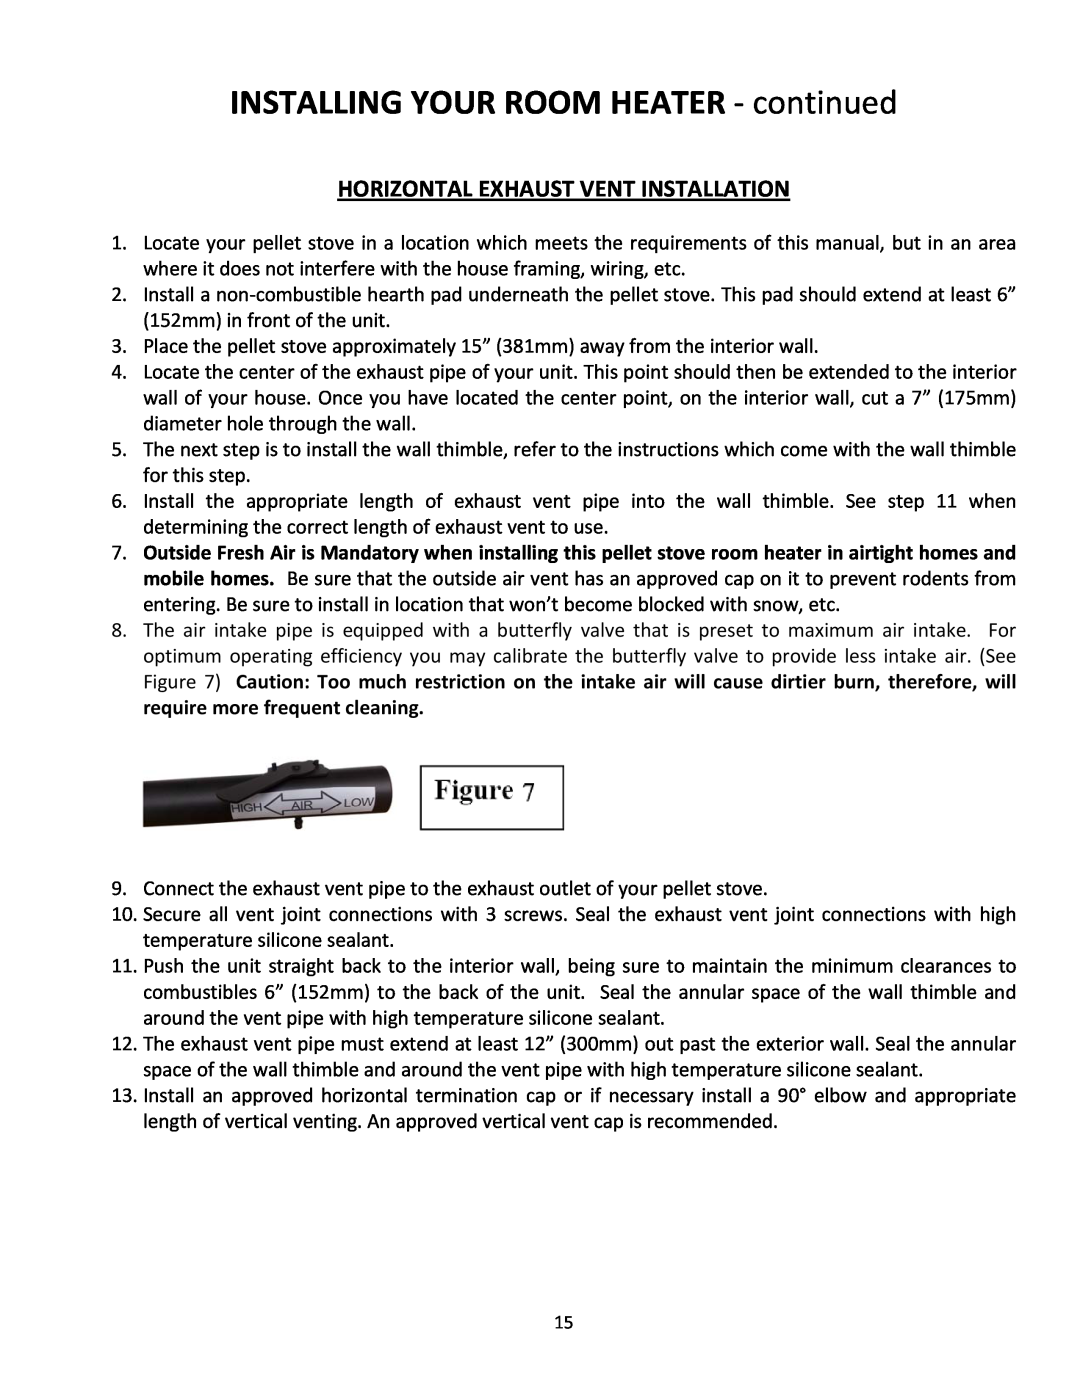 United States Stove 5660(I) manual INSTALLING YOUR ROOM HEATER ‐ continued, Horizontal Exhaust Vent Installation 